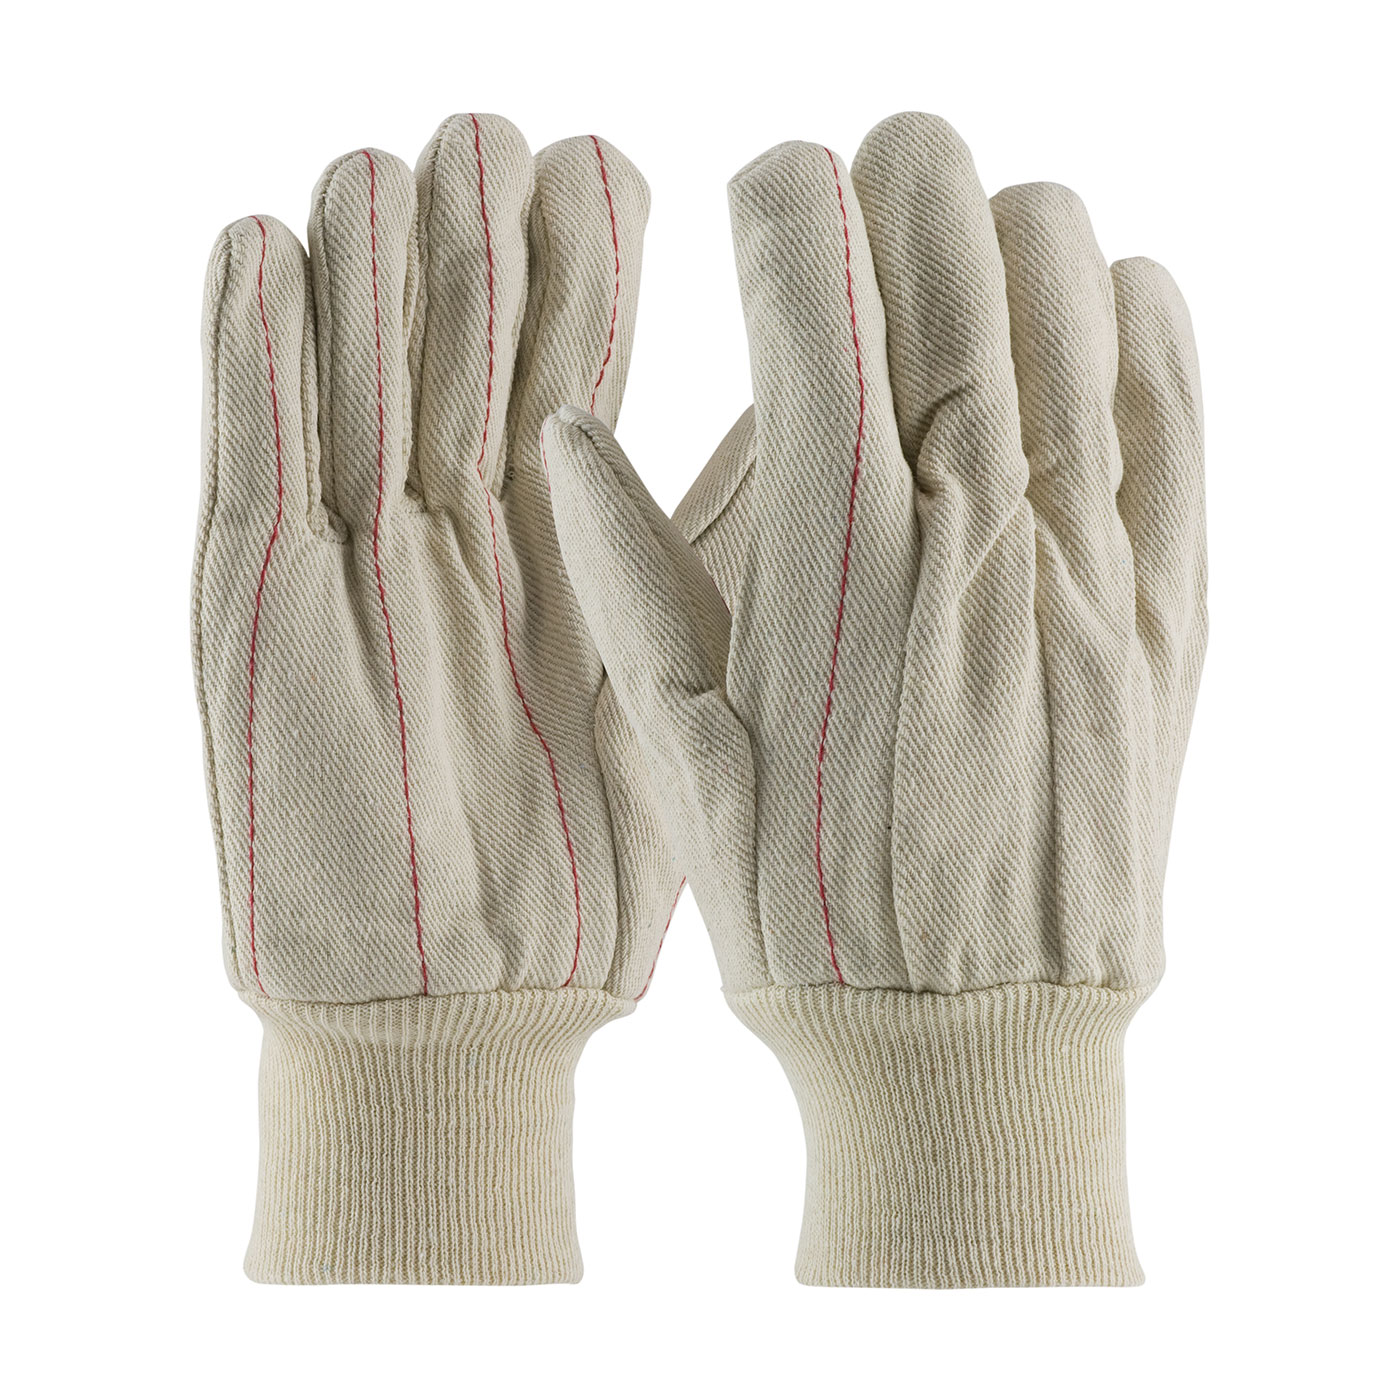 PIP 92-918 Cotton Canvas Double Palm Glove with Nap-in Finish - Knitwrist PID-92918